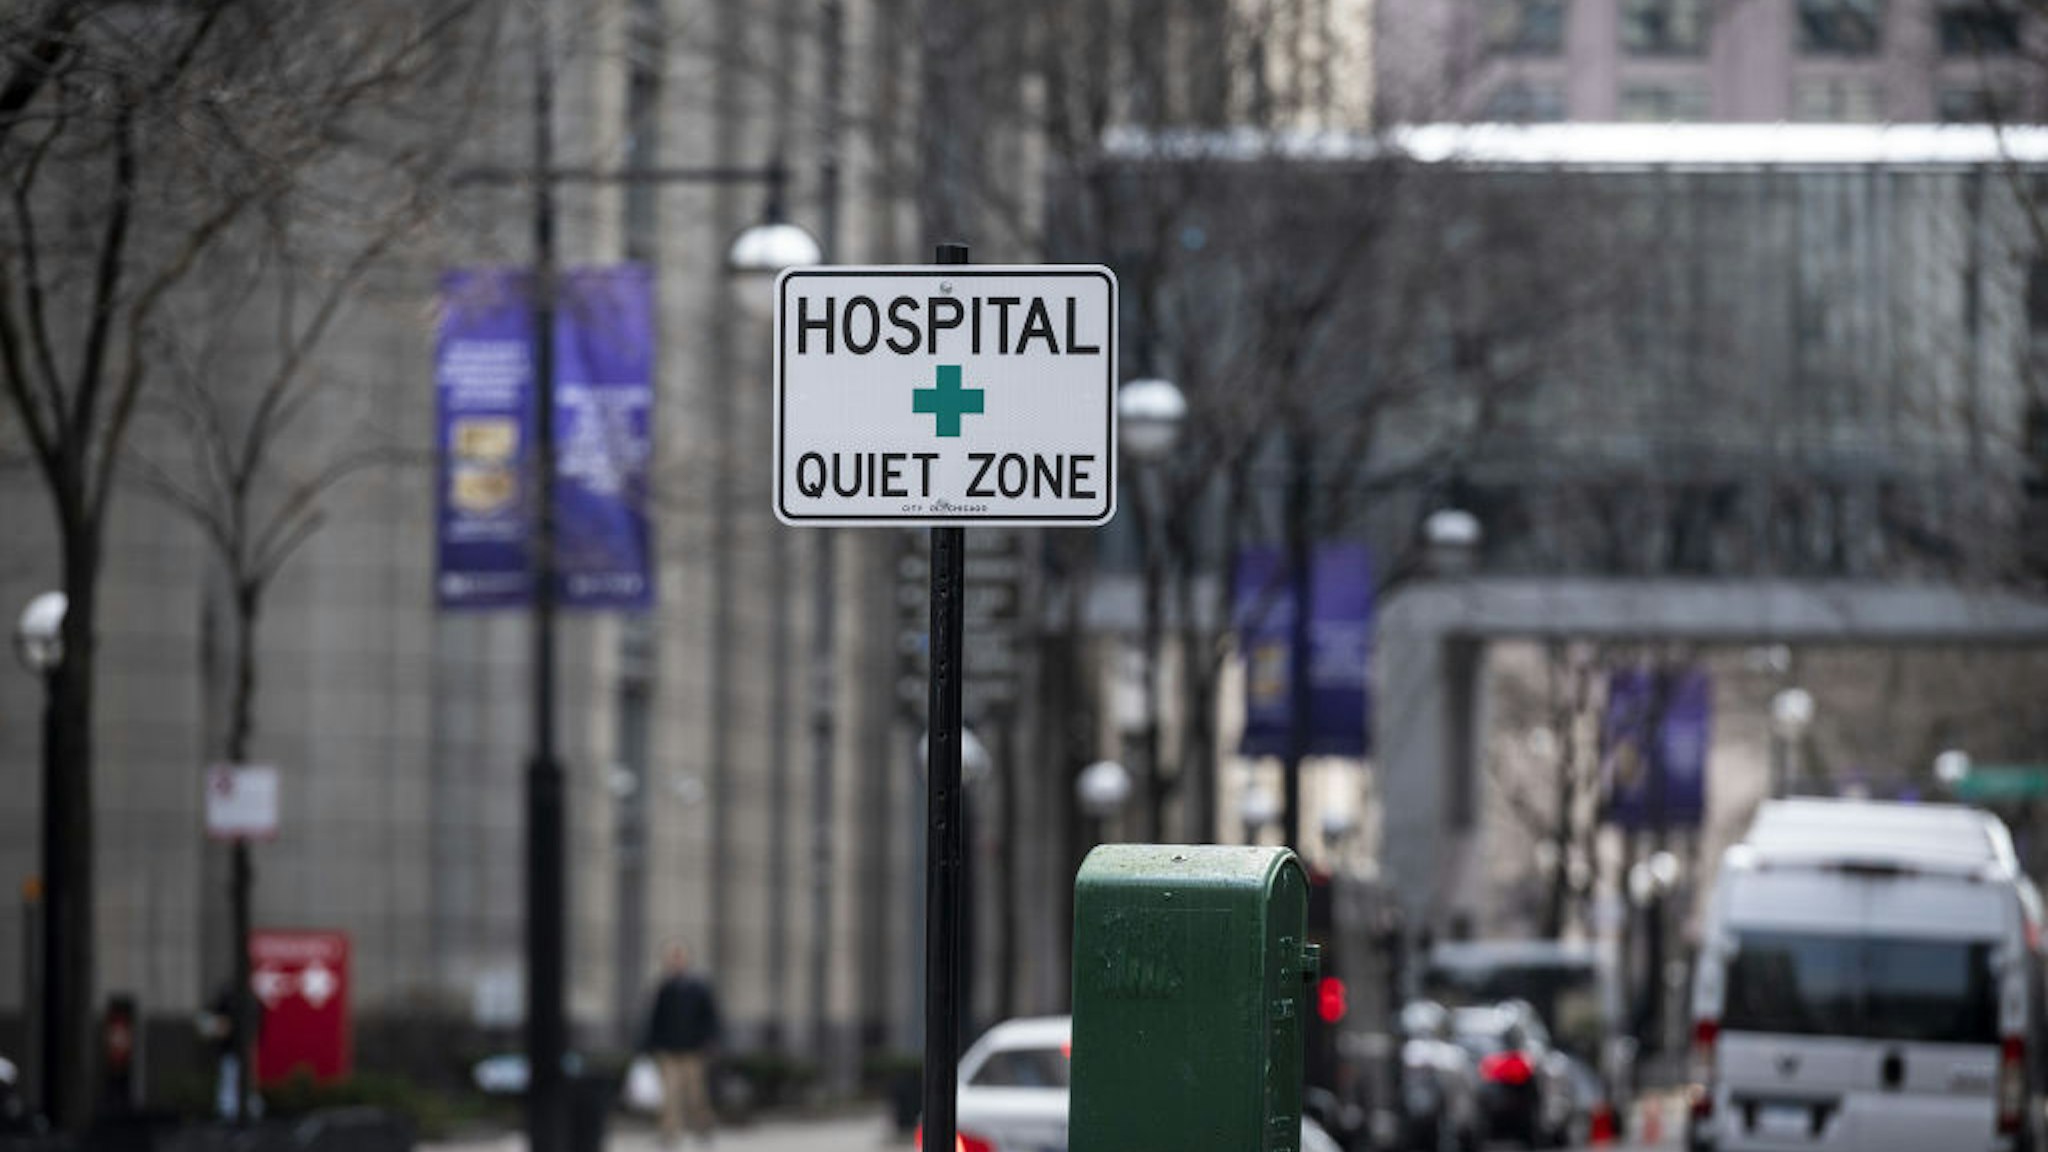 A sign reading "Hospital Quiet Zone" stands outside Northwestern Memorial Hospital in Chicago, Illinois, U.S., on Friday, April 3, 2020. The world's workers are reeling from the initial shock of the coronavirus recession, with job losses and welfare claims around the globe already running into the millions this week.